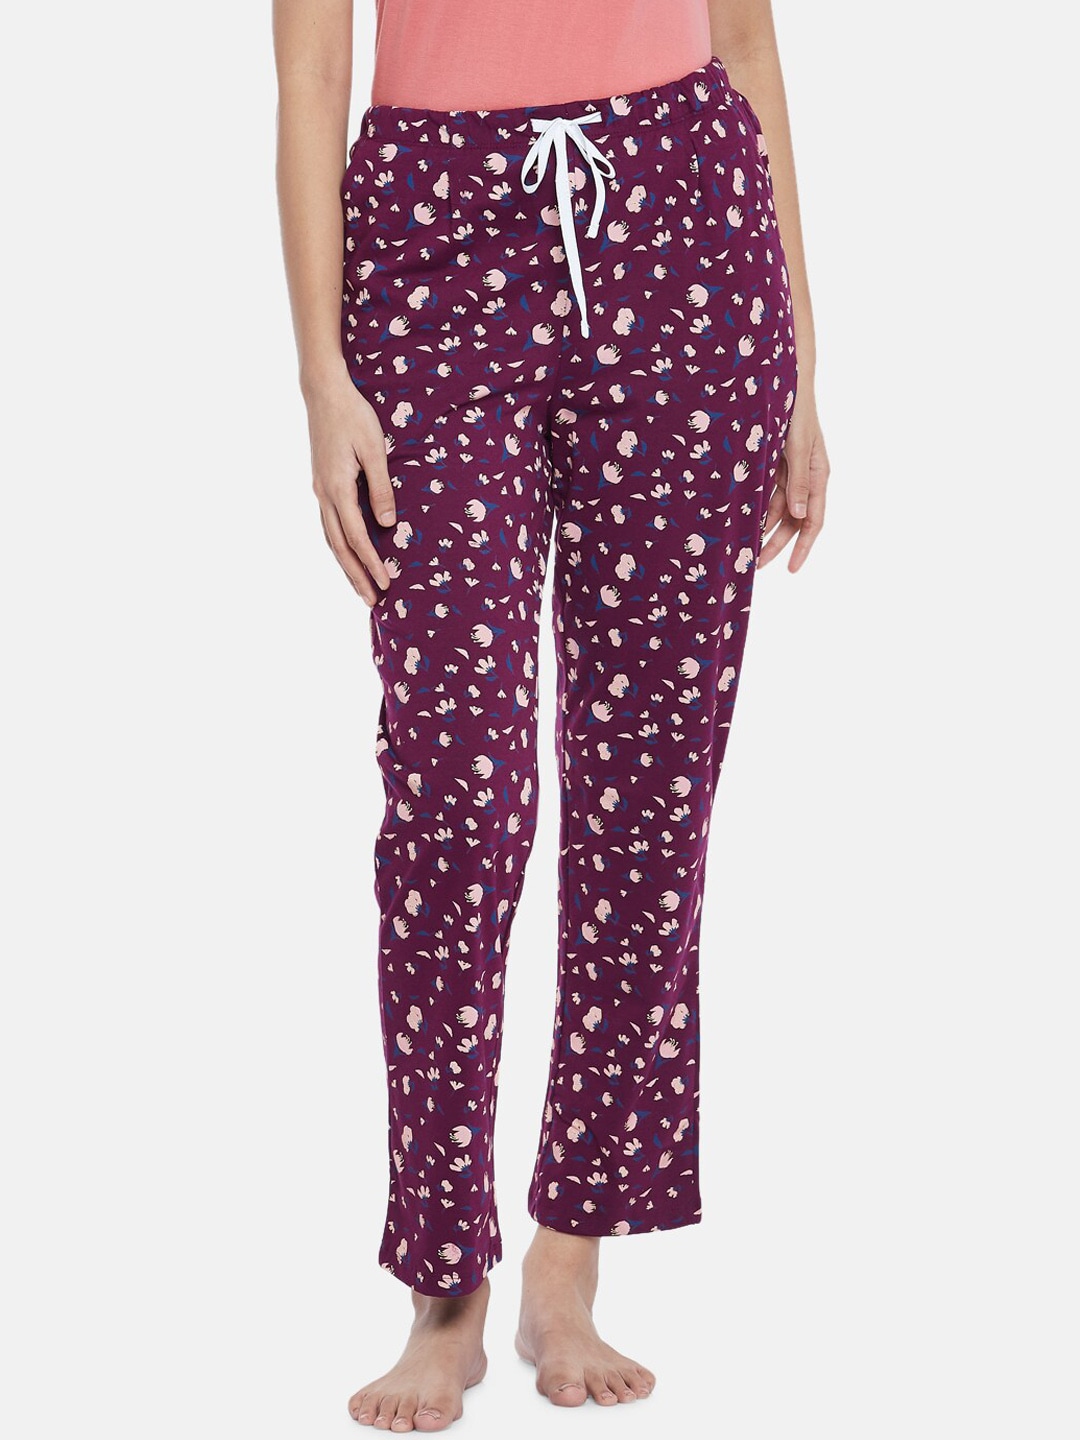 Dreamz by Pantaloons Women Maroon & Pink Printed Cotton Lounge Pants Price in India